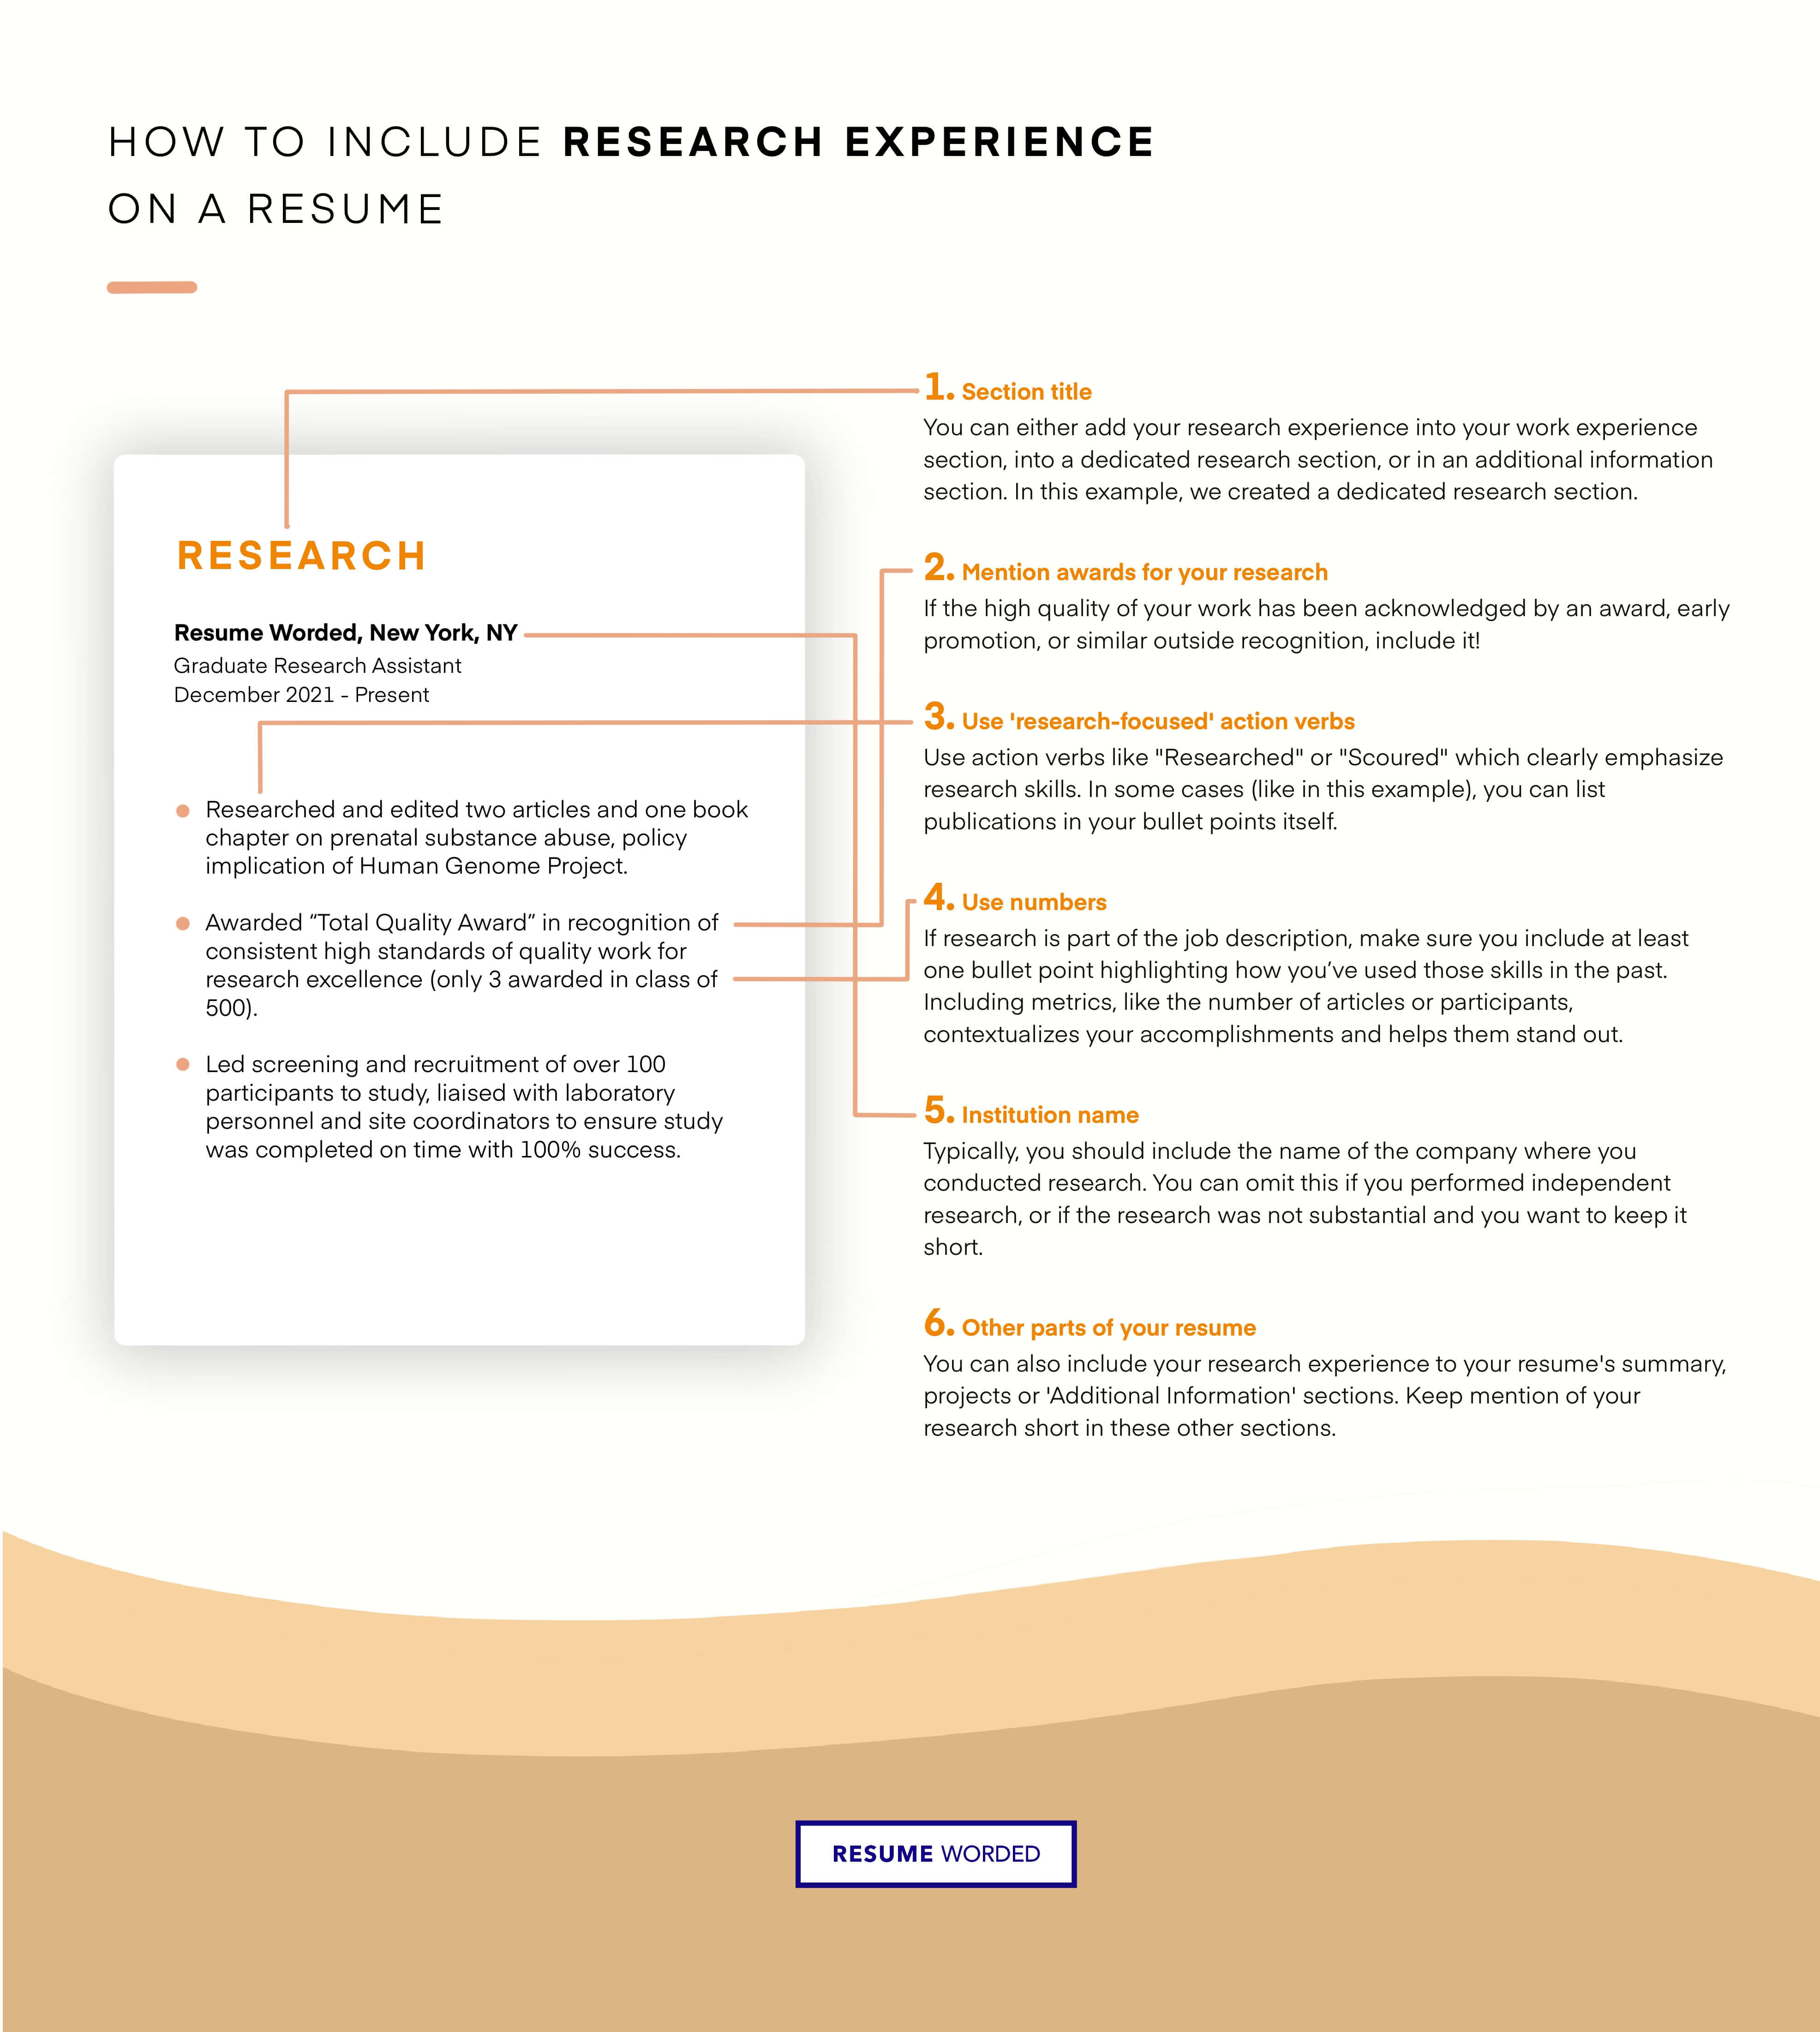 Include any research-based experience. - Junior Business Analyst Resume